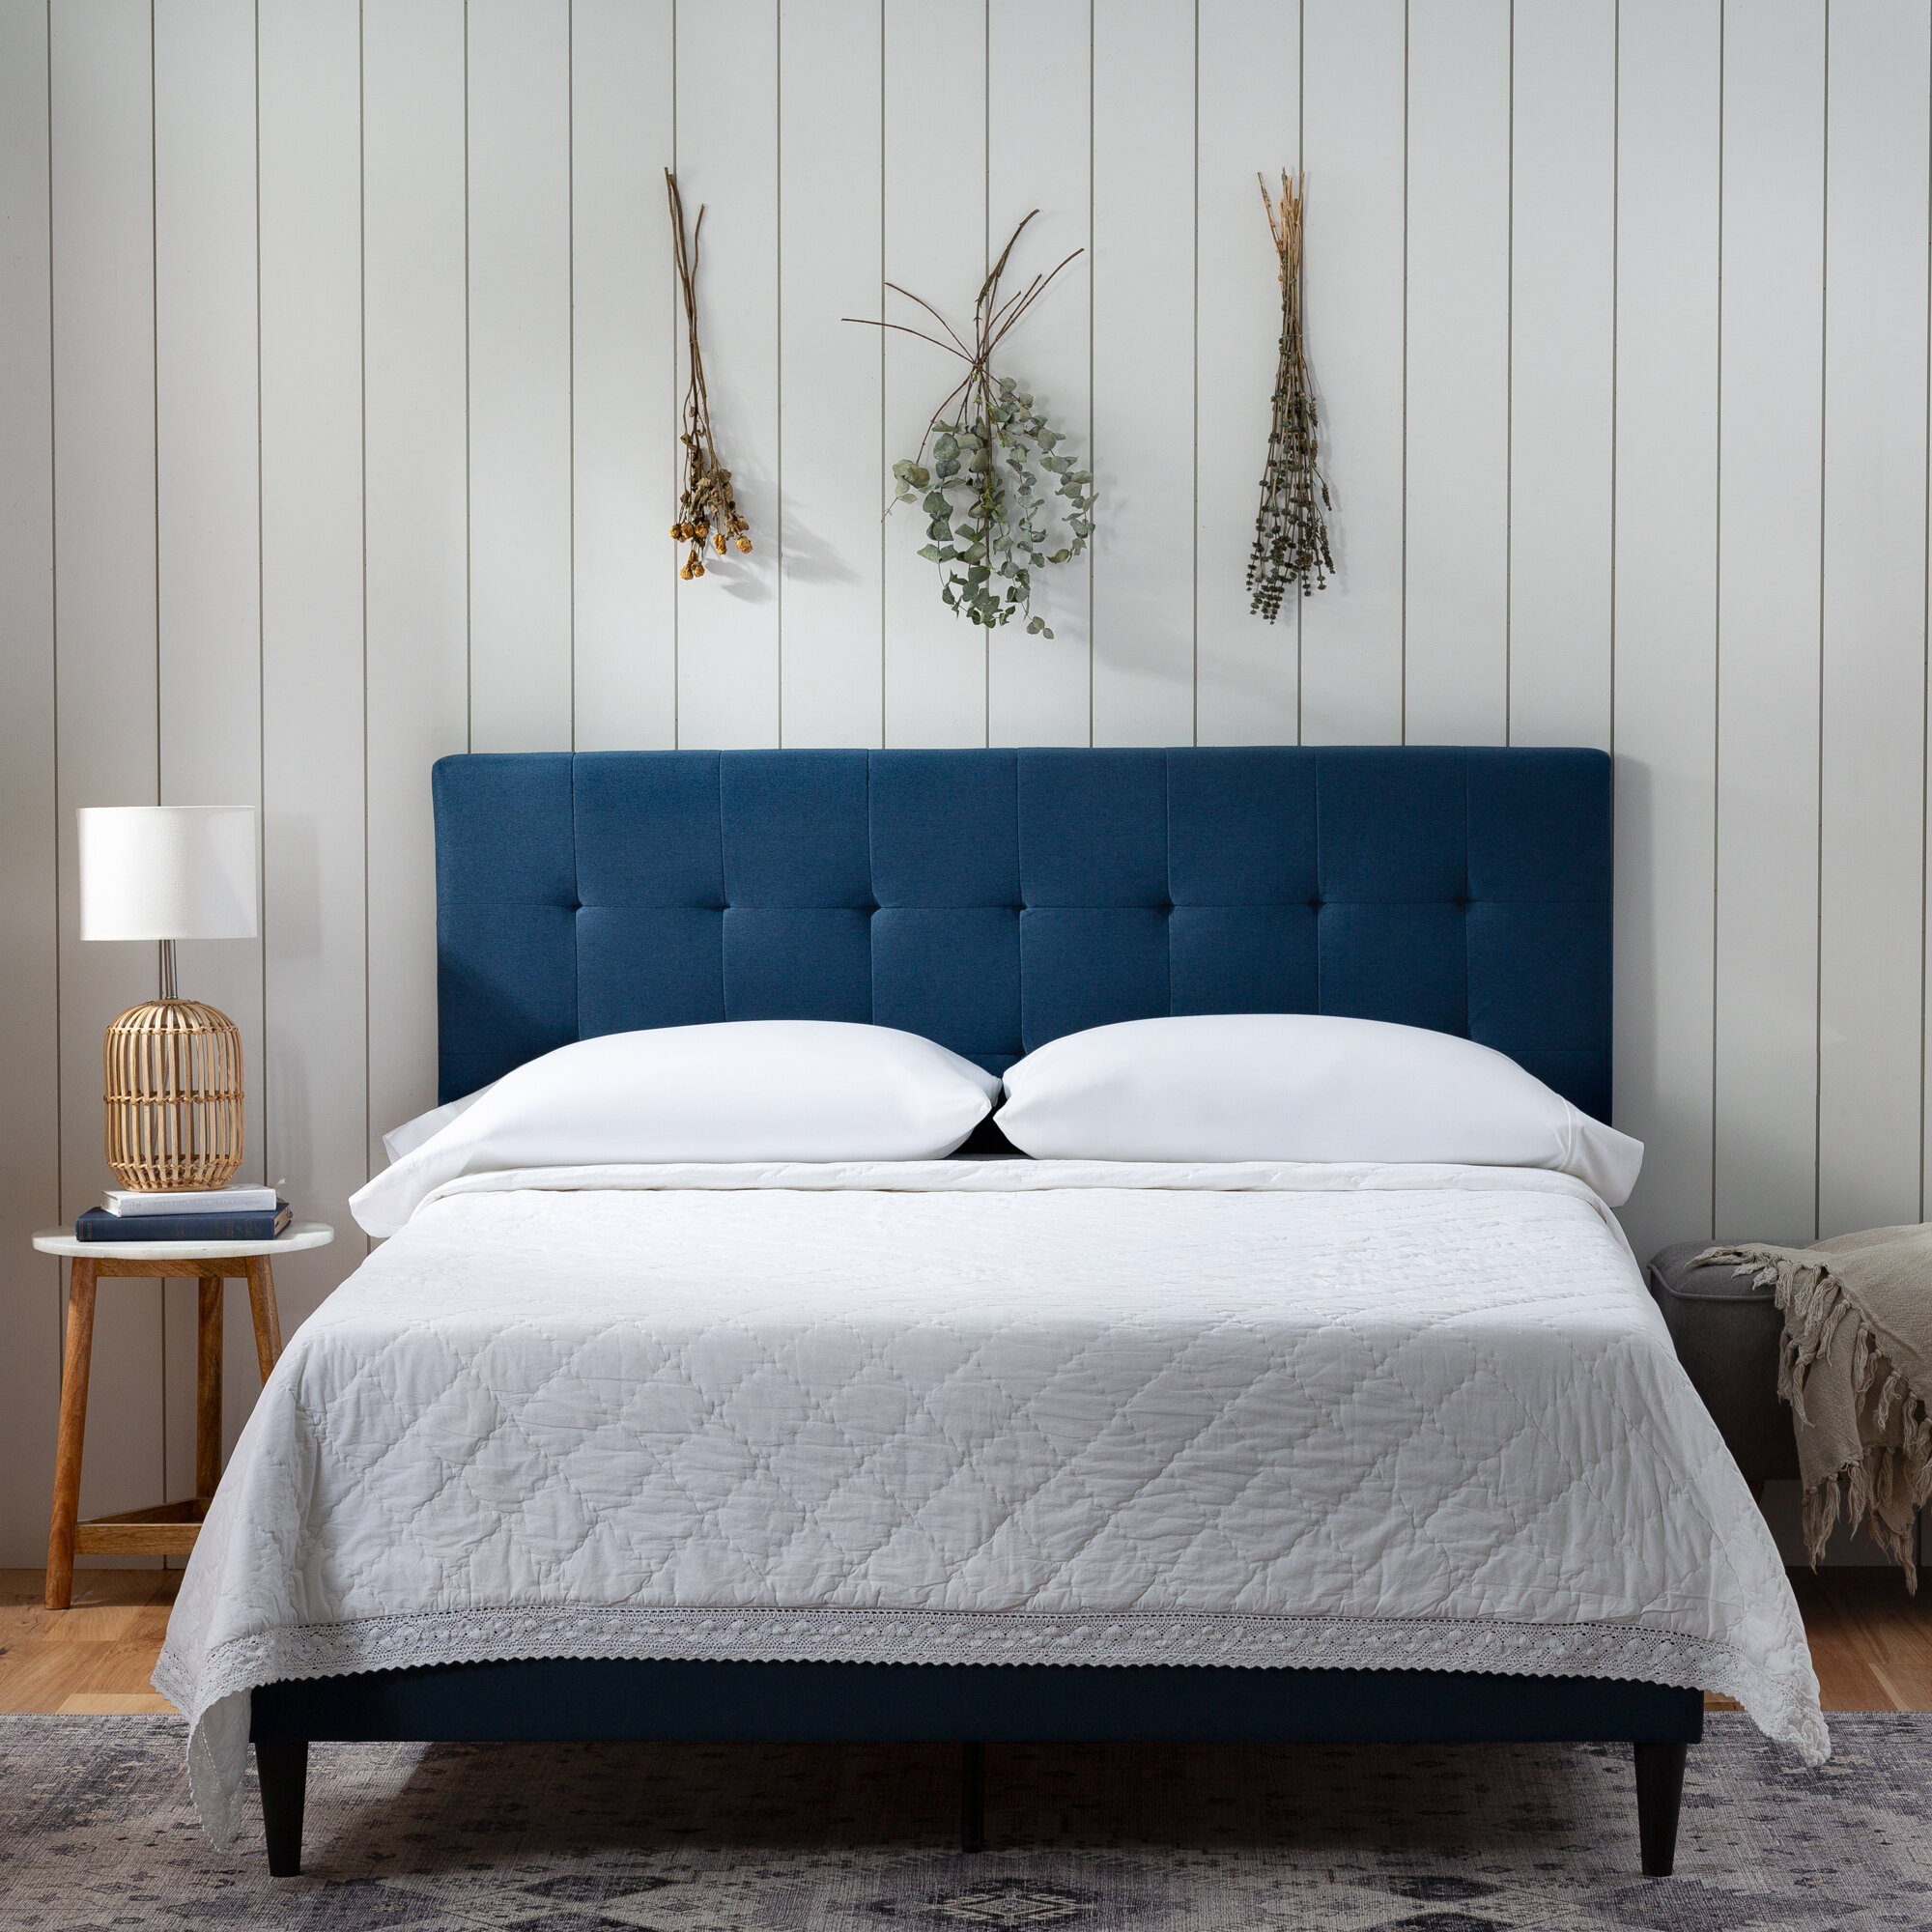 Details about   Mid Century Bedroom Bed Frame Headboard with Slats Full Size Bed Grey 